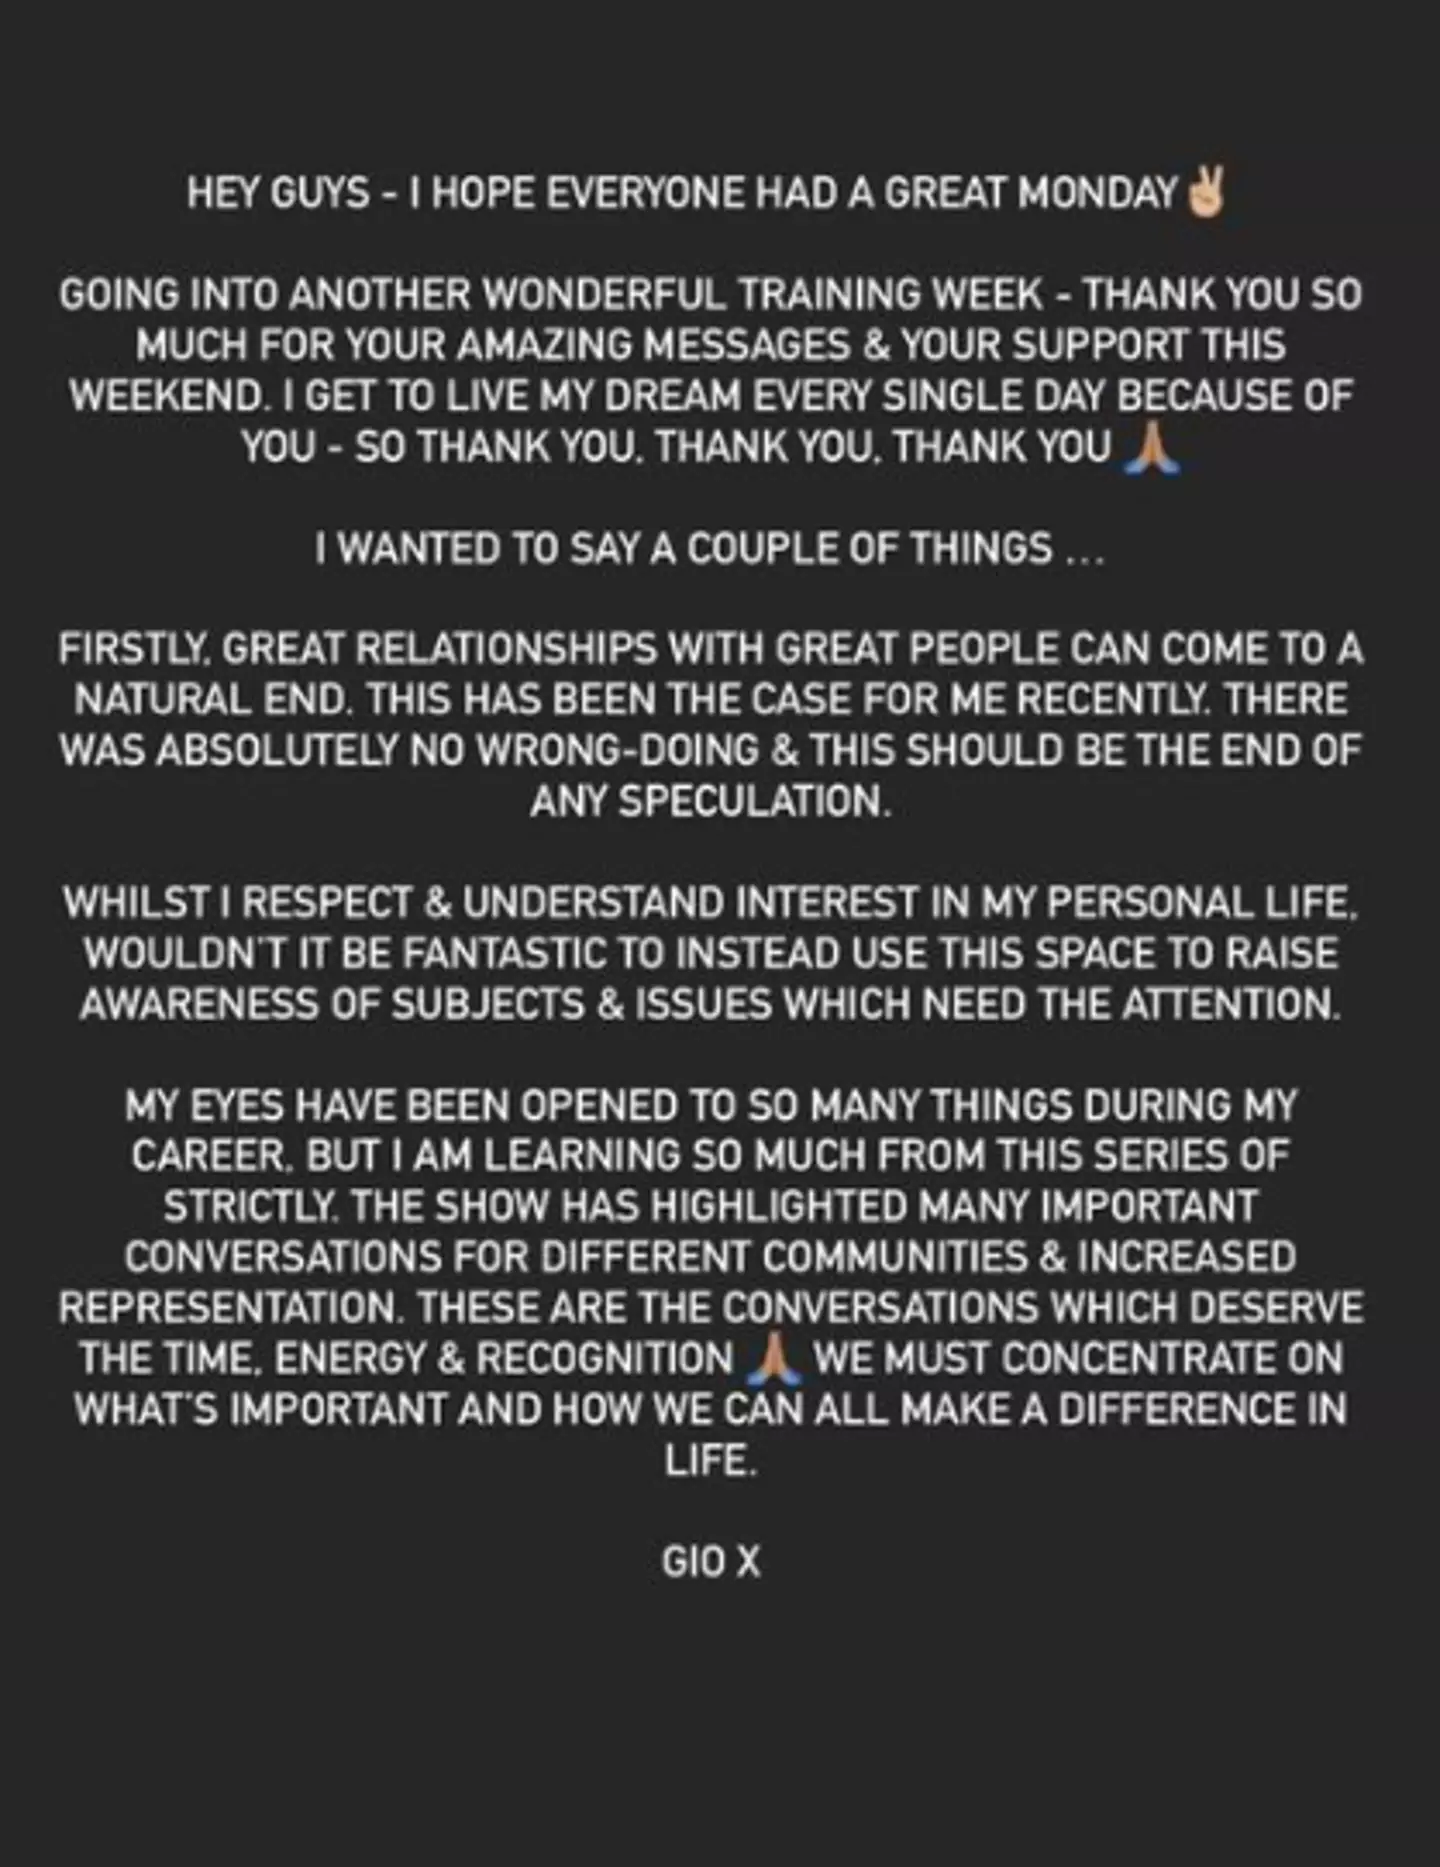 Giovanni posted this statement on his instagram stories (